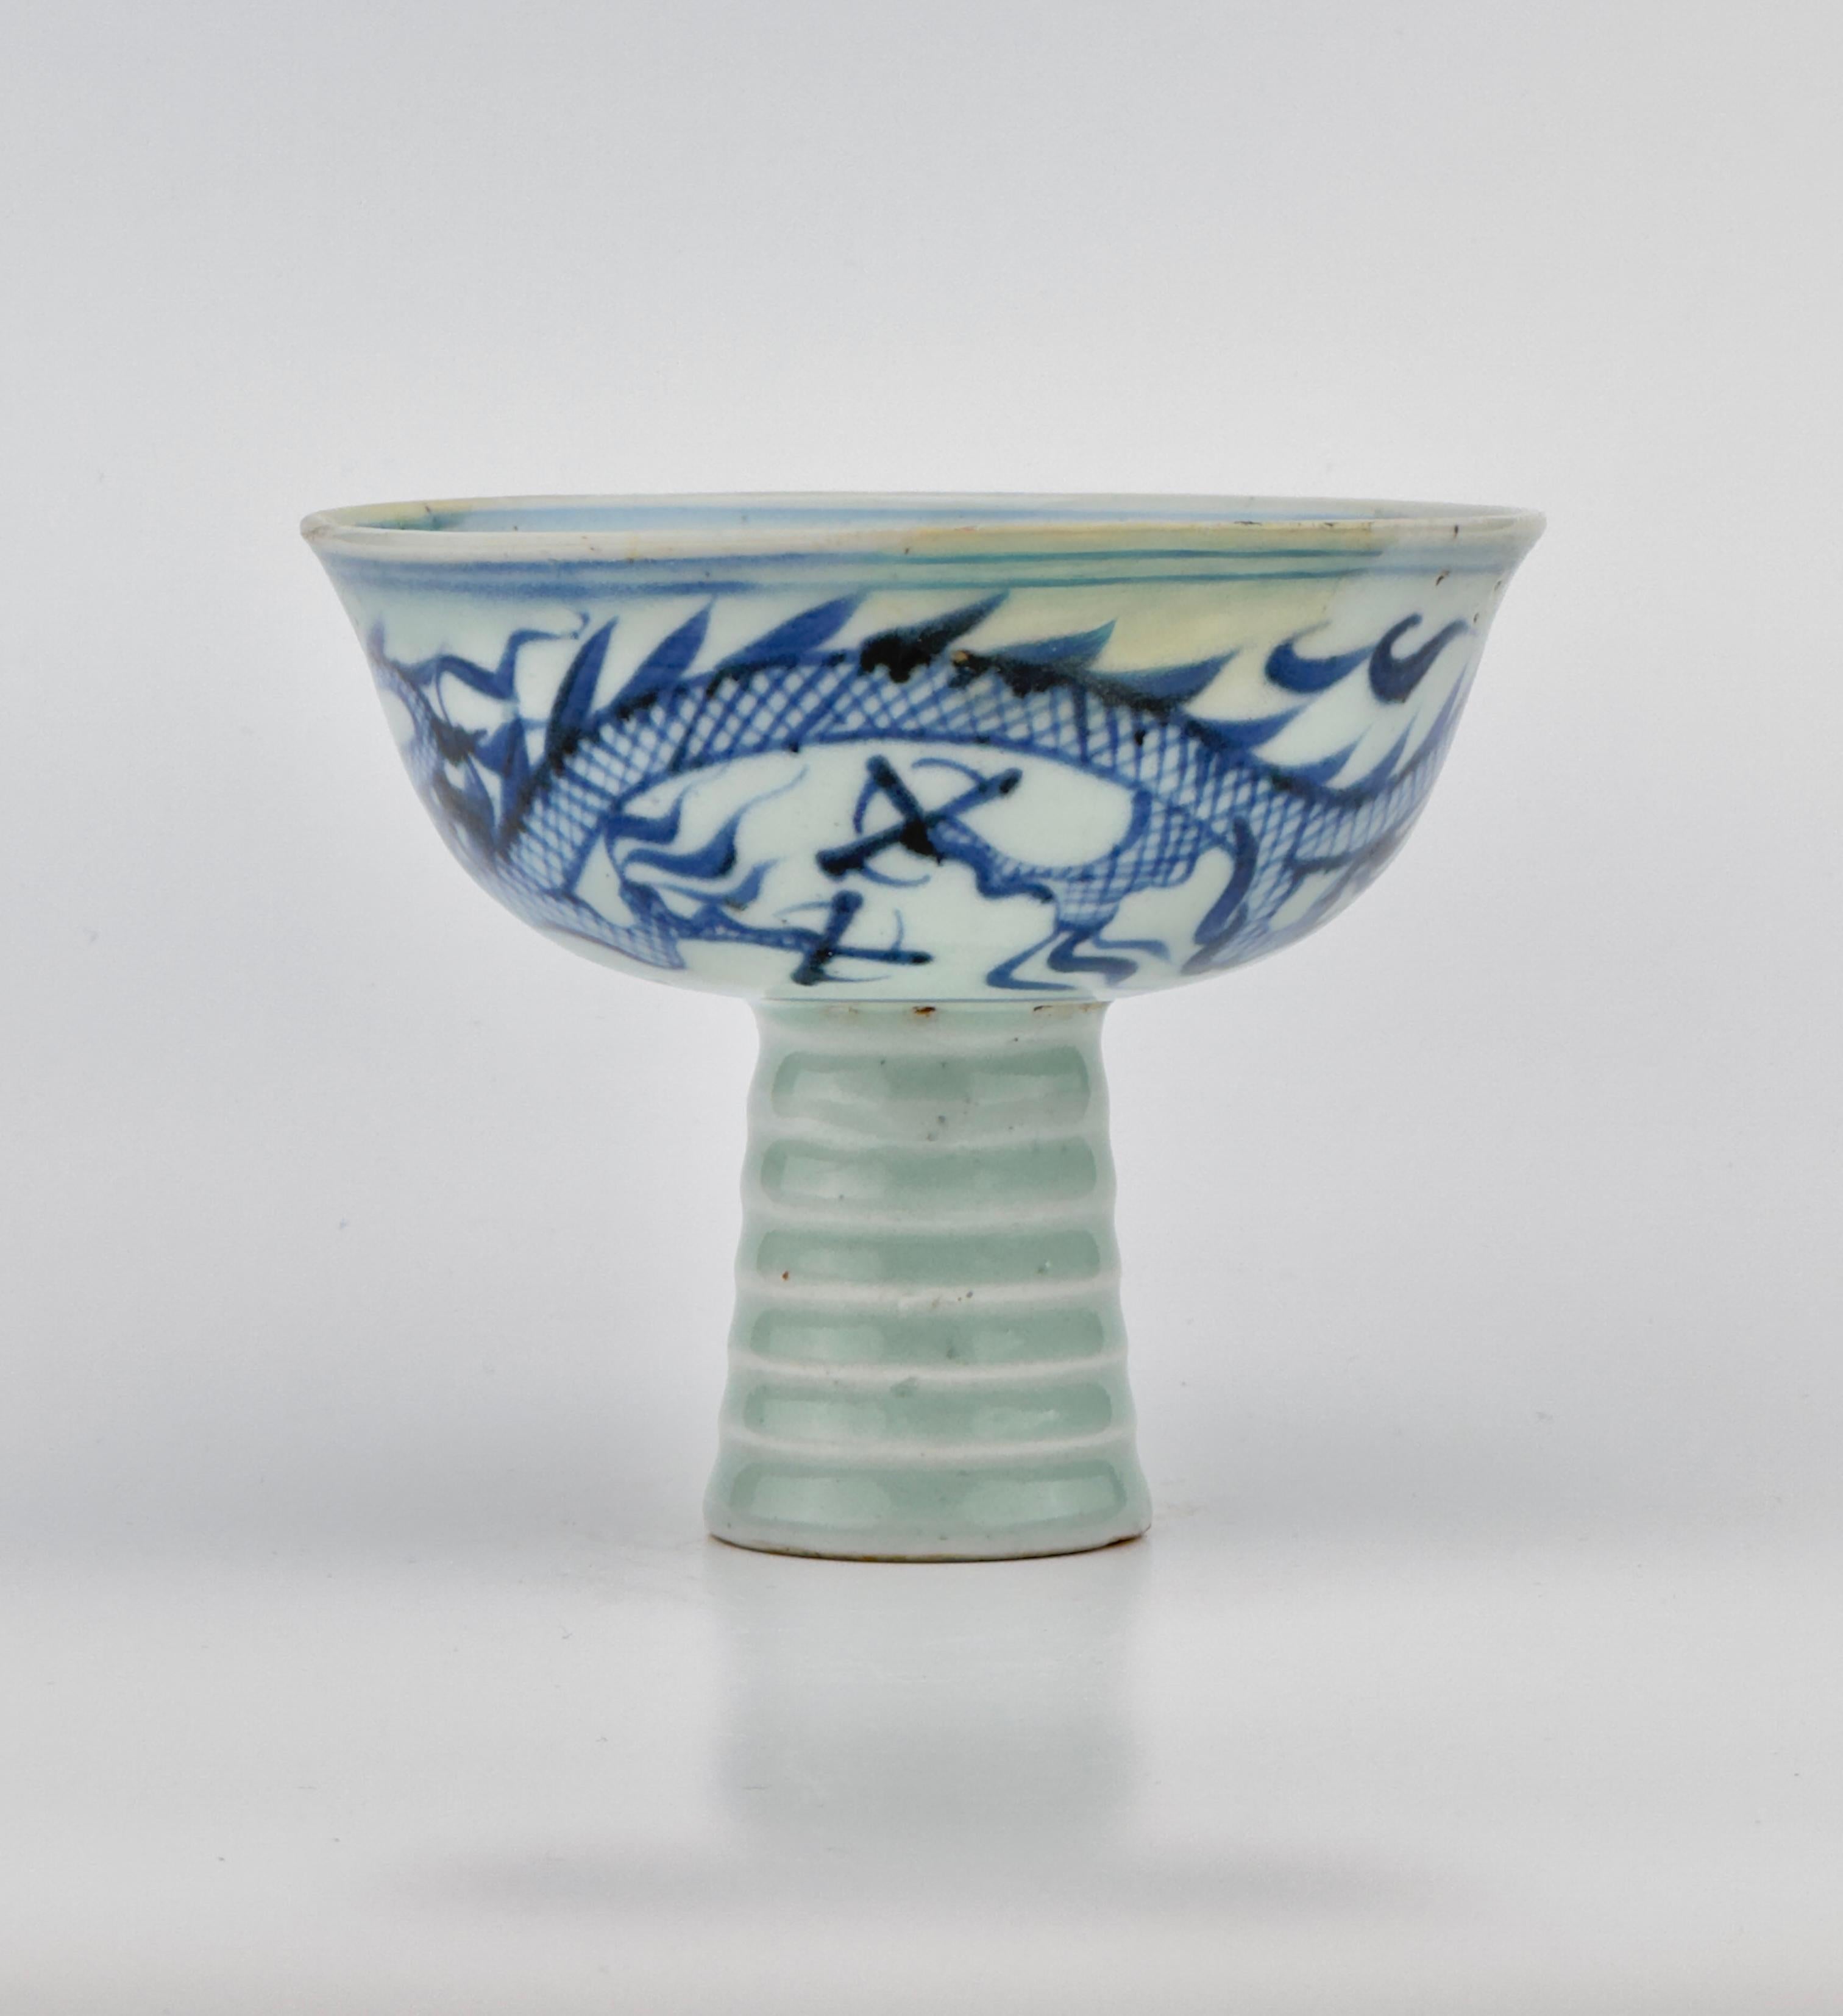 Ming Blue And White 'Dragon' Stem Cup, Yuan Dynasty(1271-1368)